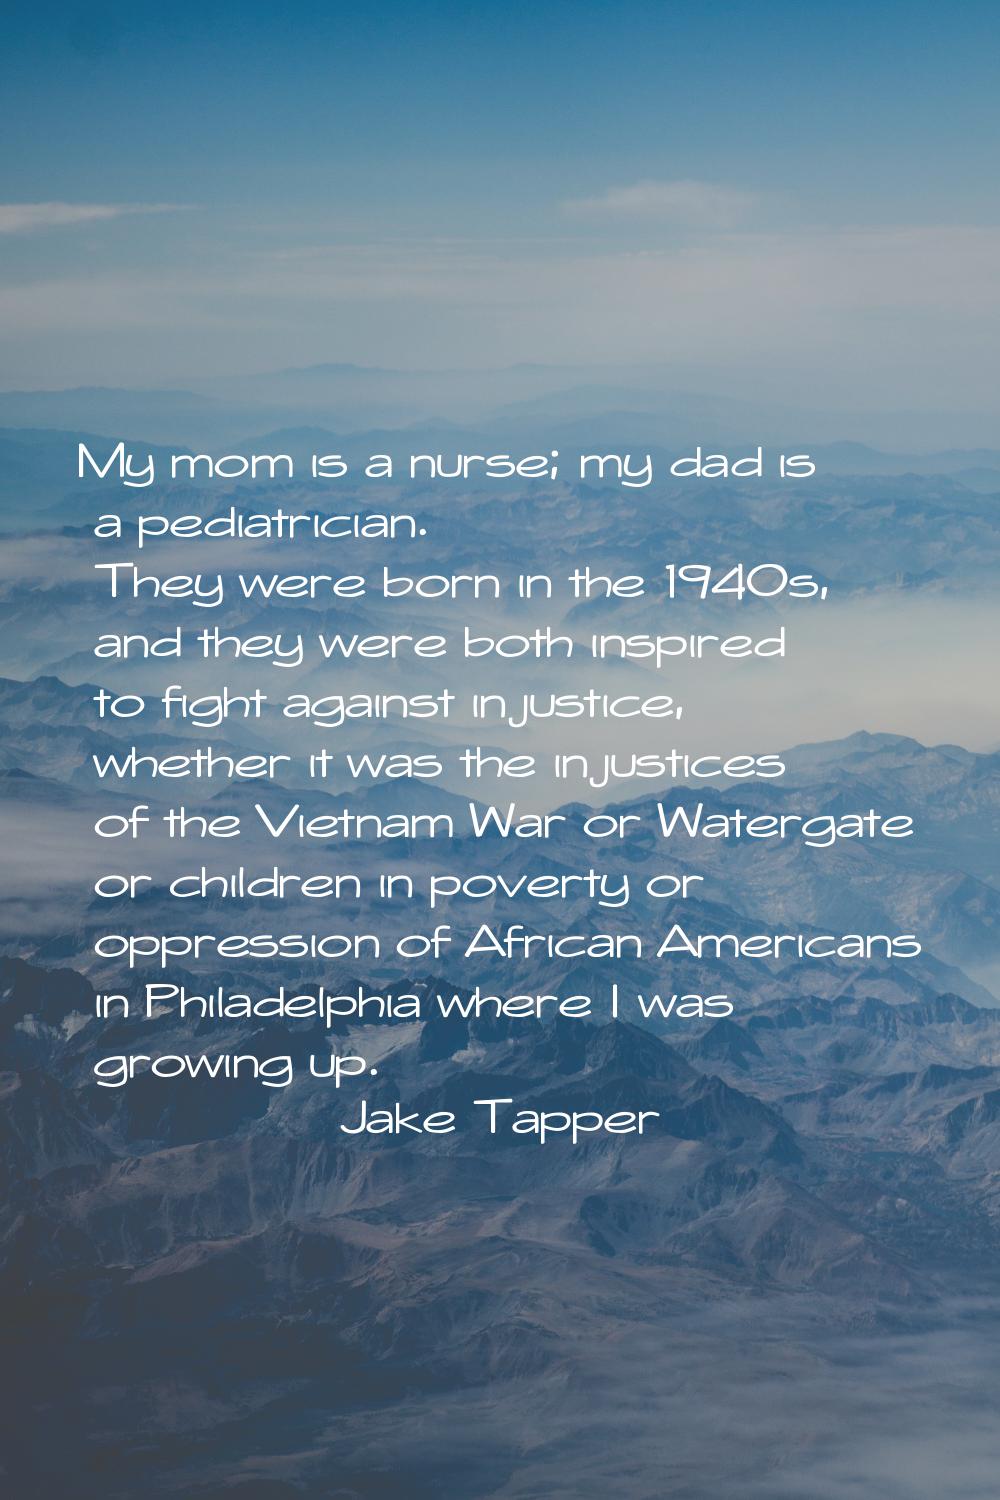 My mom is a nurse; my dad is a pediatrician. They were born in the 1940s, and they were both inspir